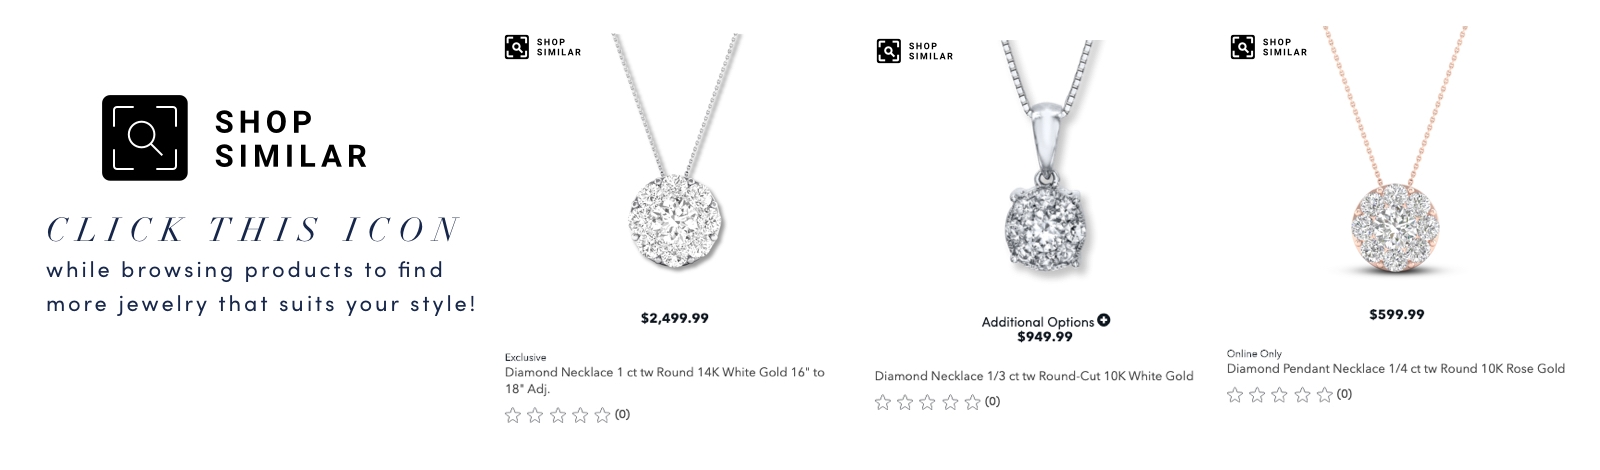 Directions to use the Shop Similar function on the visual search tool showing three diamond halo pendants of similar gold colors and carat weights.